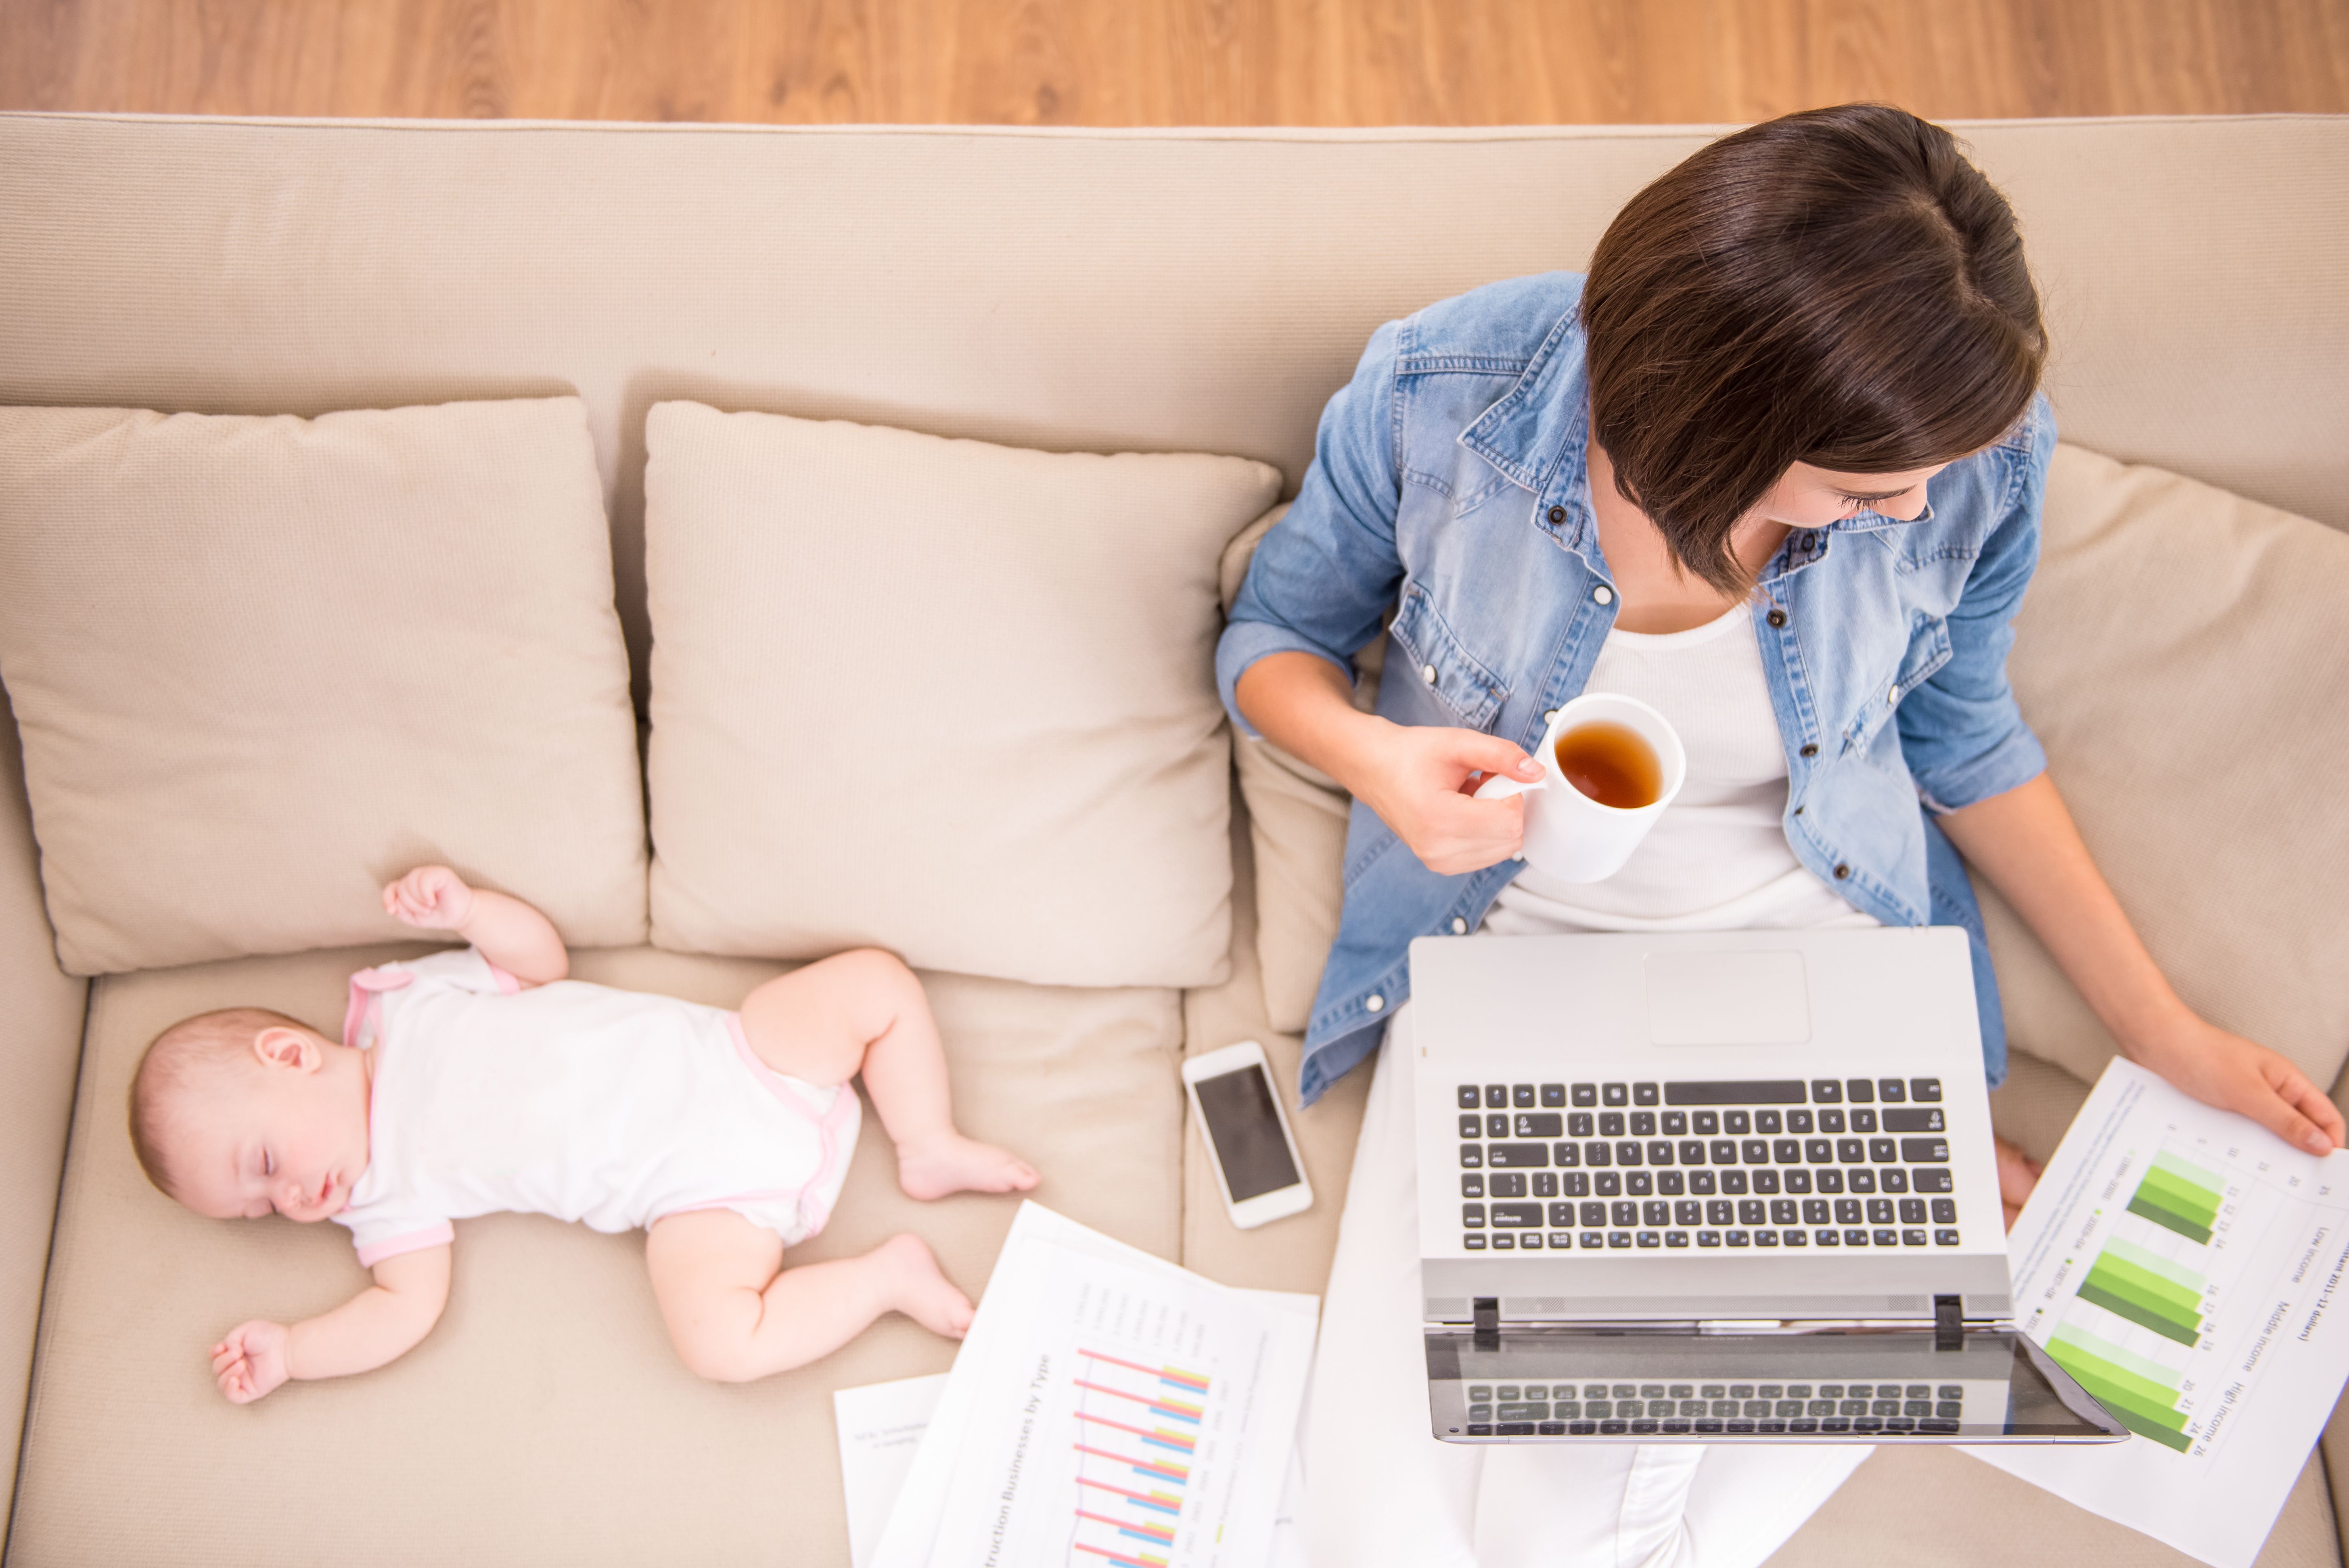 A busy mom working while her baby sleeps. | Source: Shutterstock